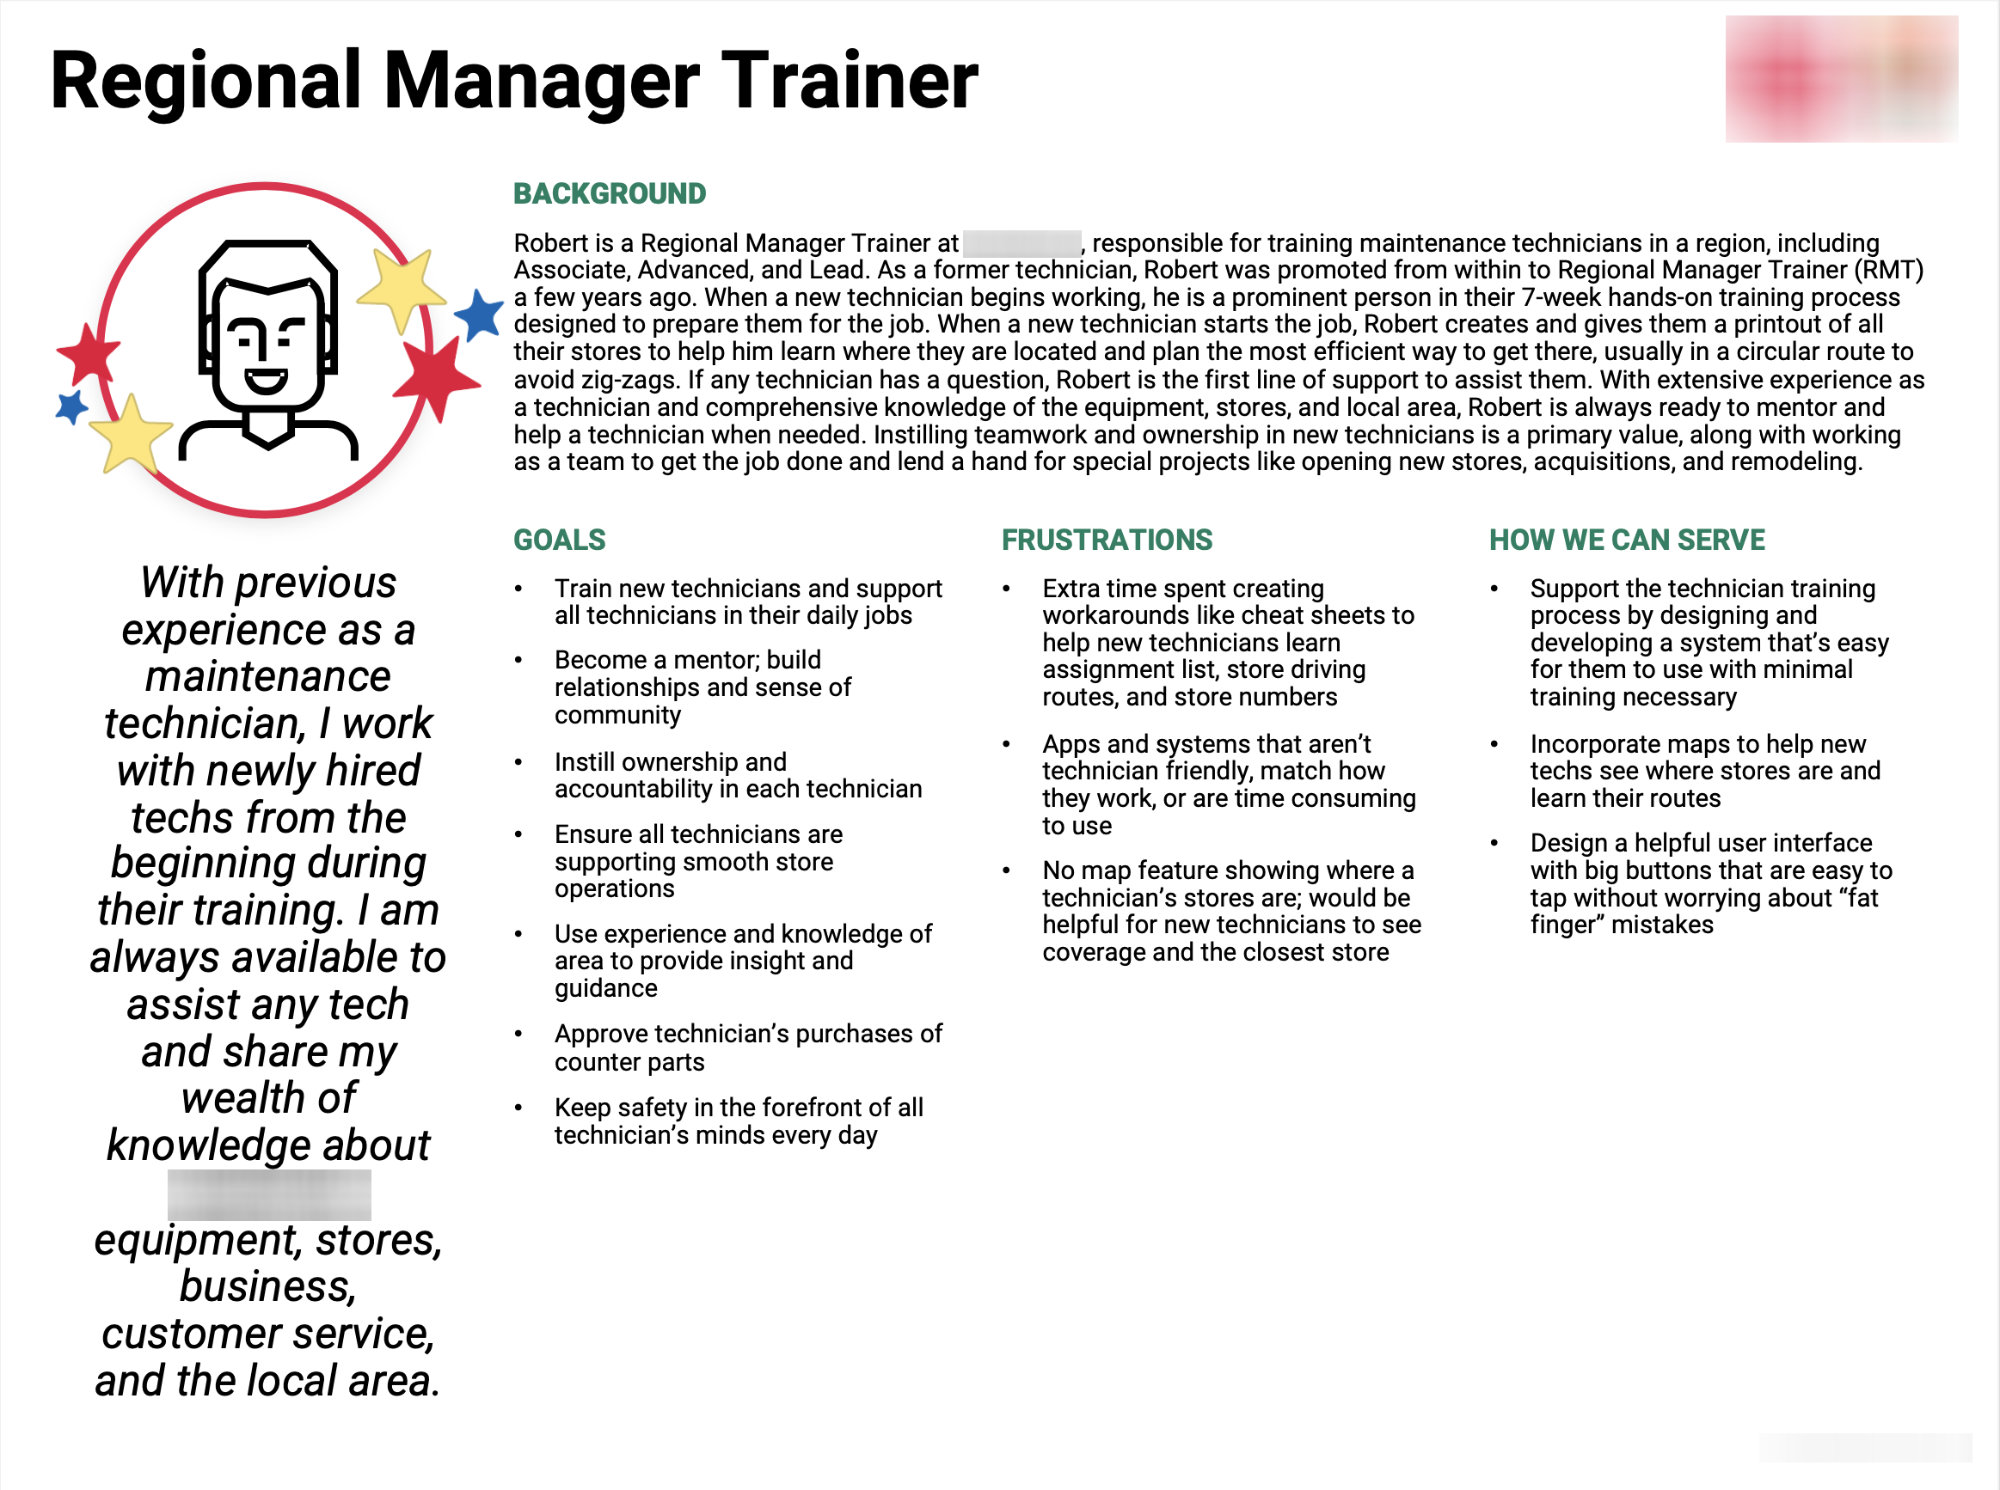 Persona for Regional Manager Trainer